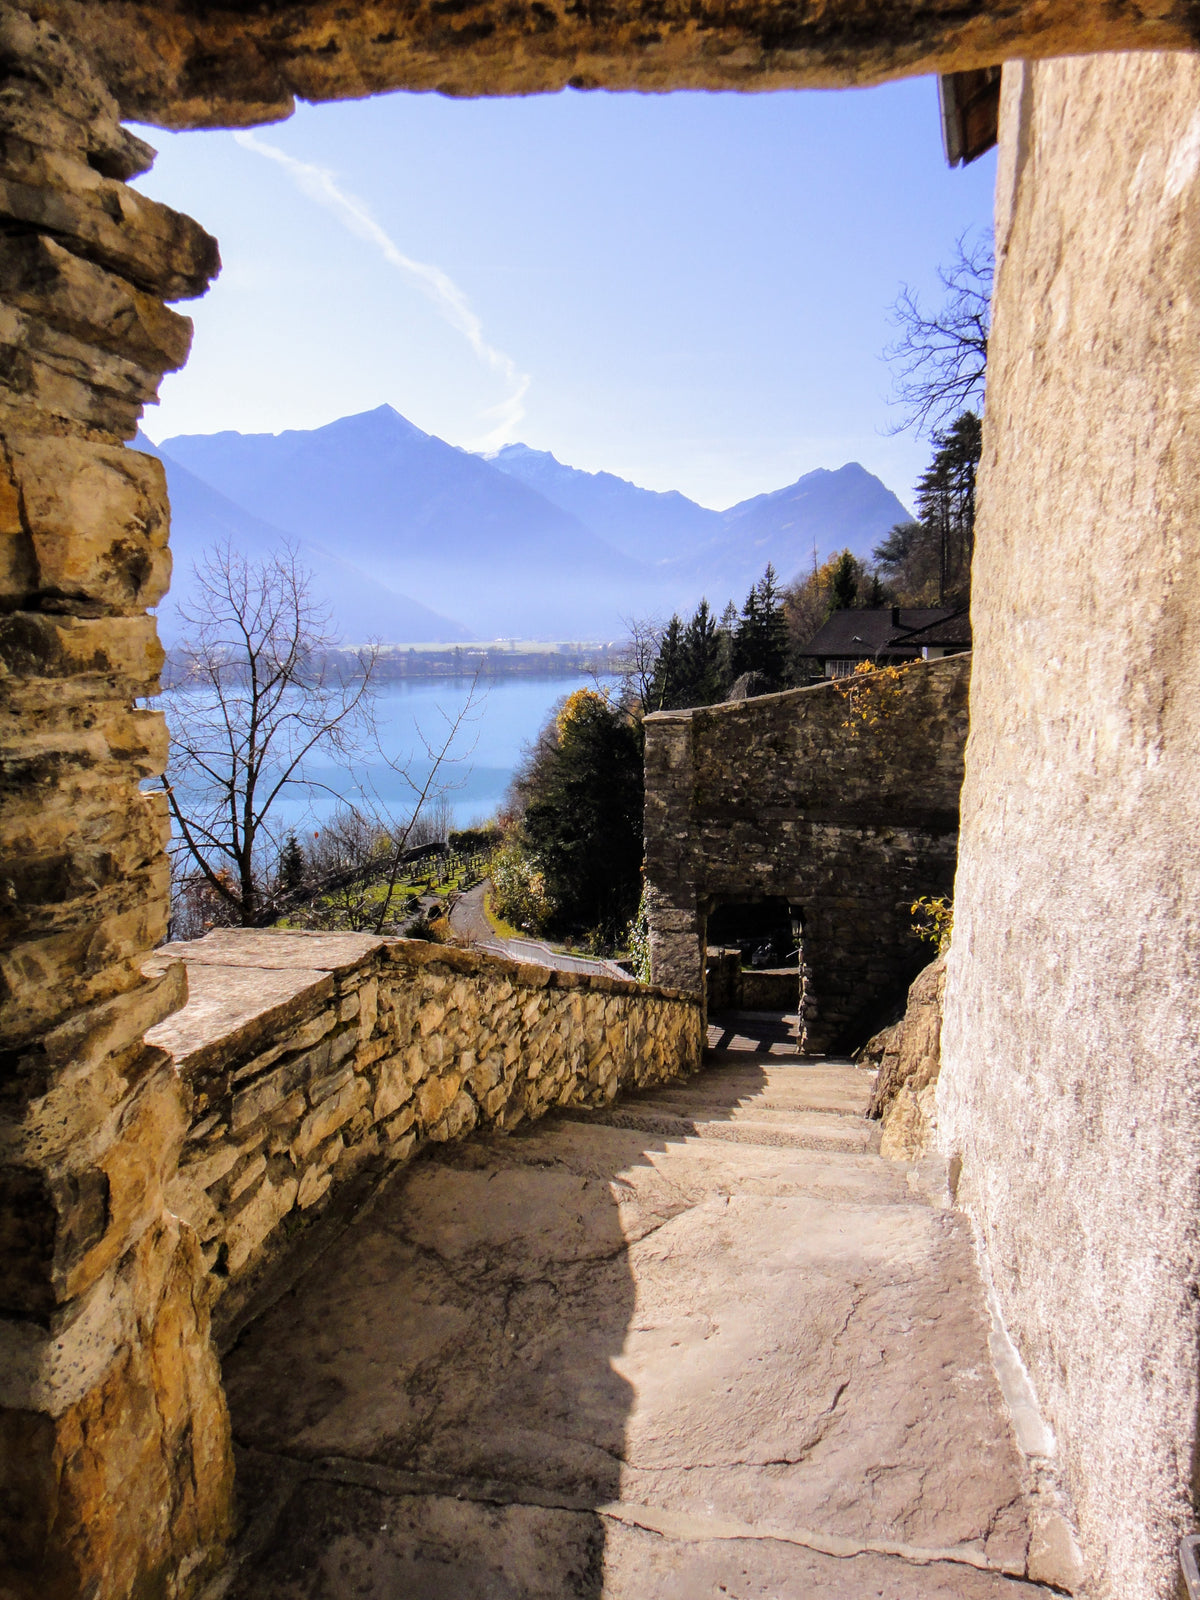 paved walkway by lake and mountains